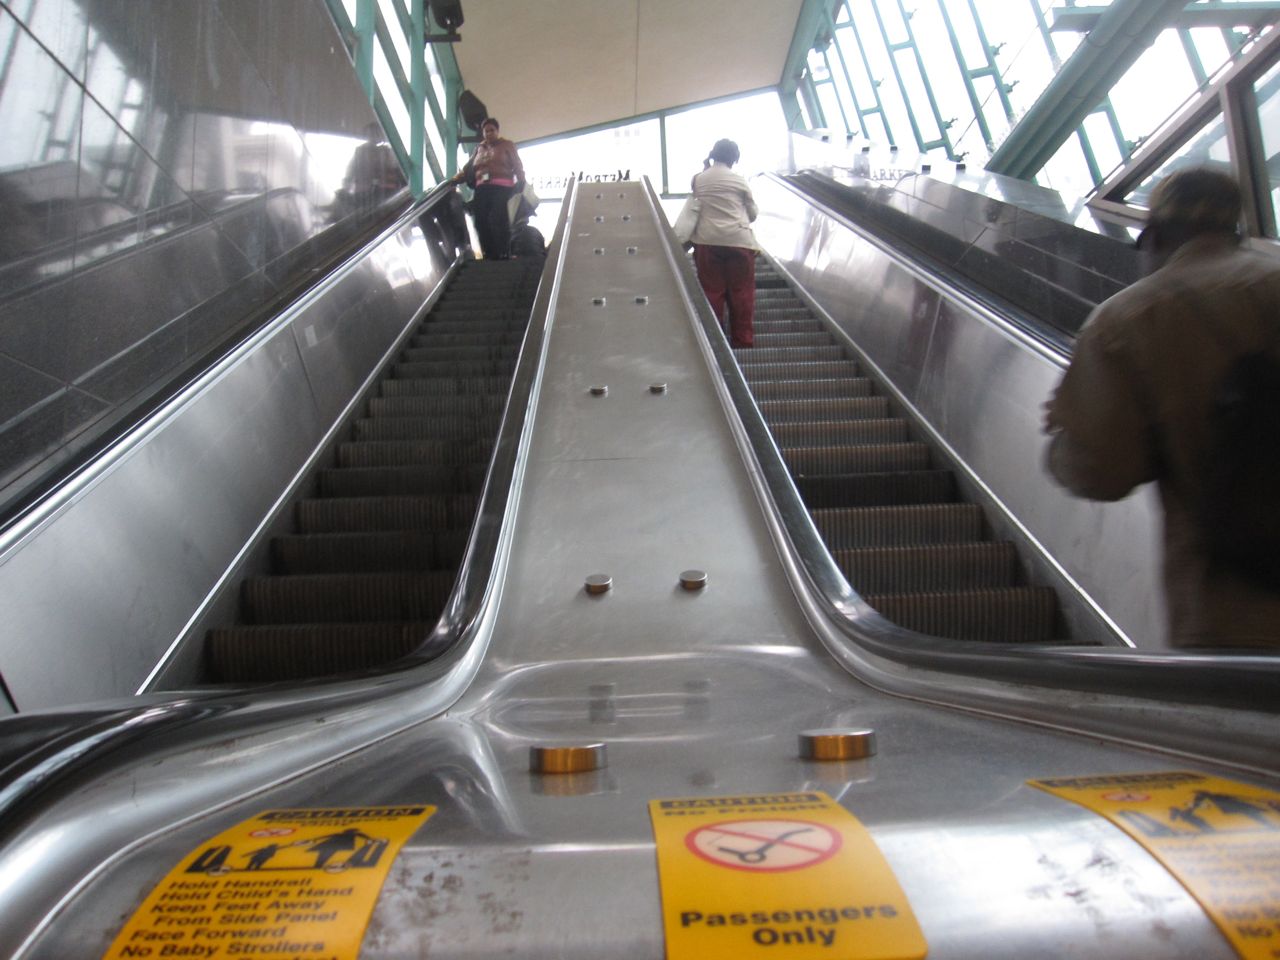 Escalator at 15th Street and Concourse